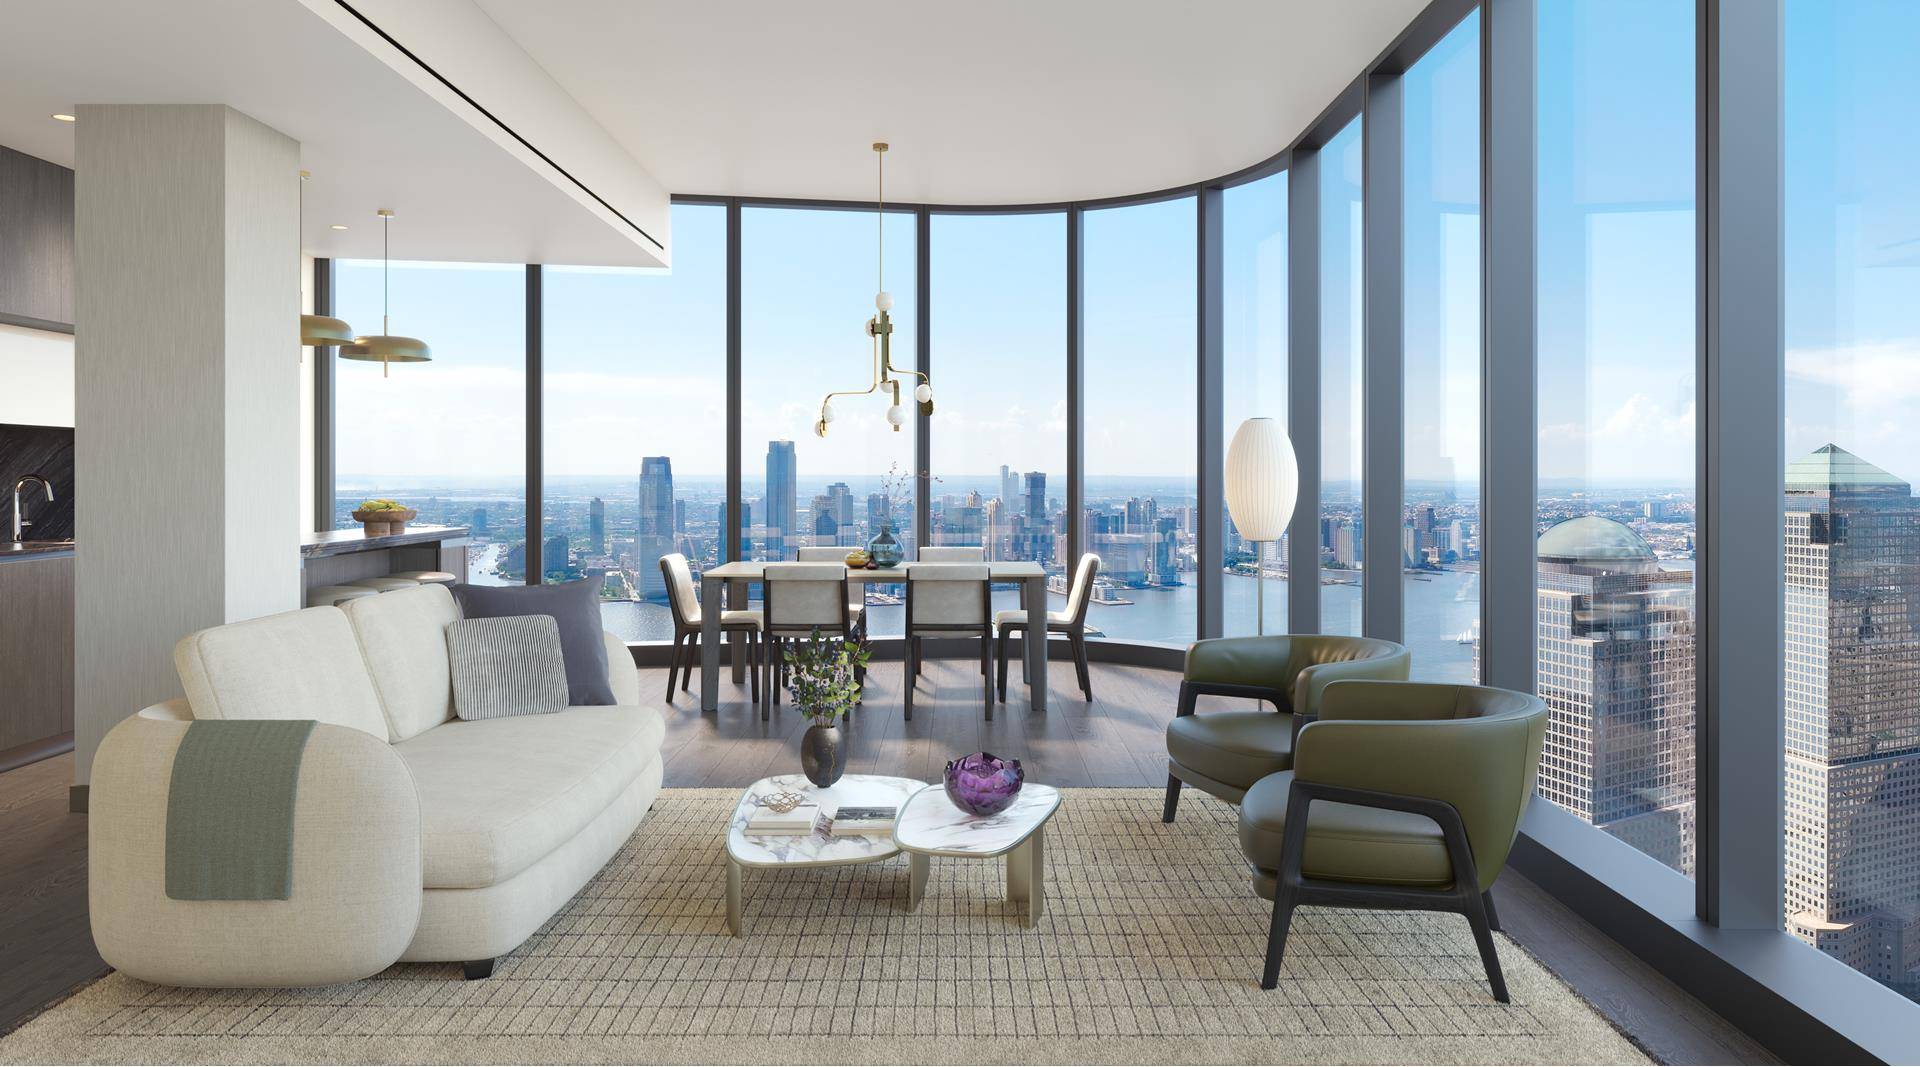 Enter Residence 68D at The Greenwich by Rafael Vi oly, a one bedroom, one and a half bathroom with magnificent southern and western views from the floor to ceiling windows.